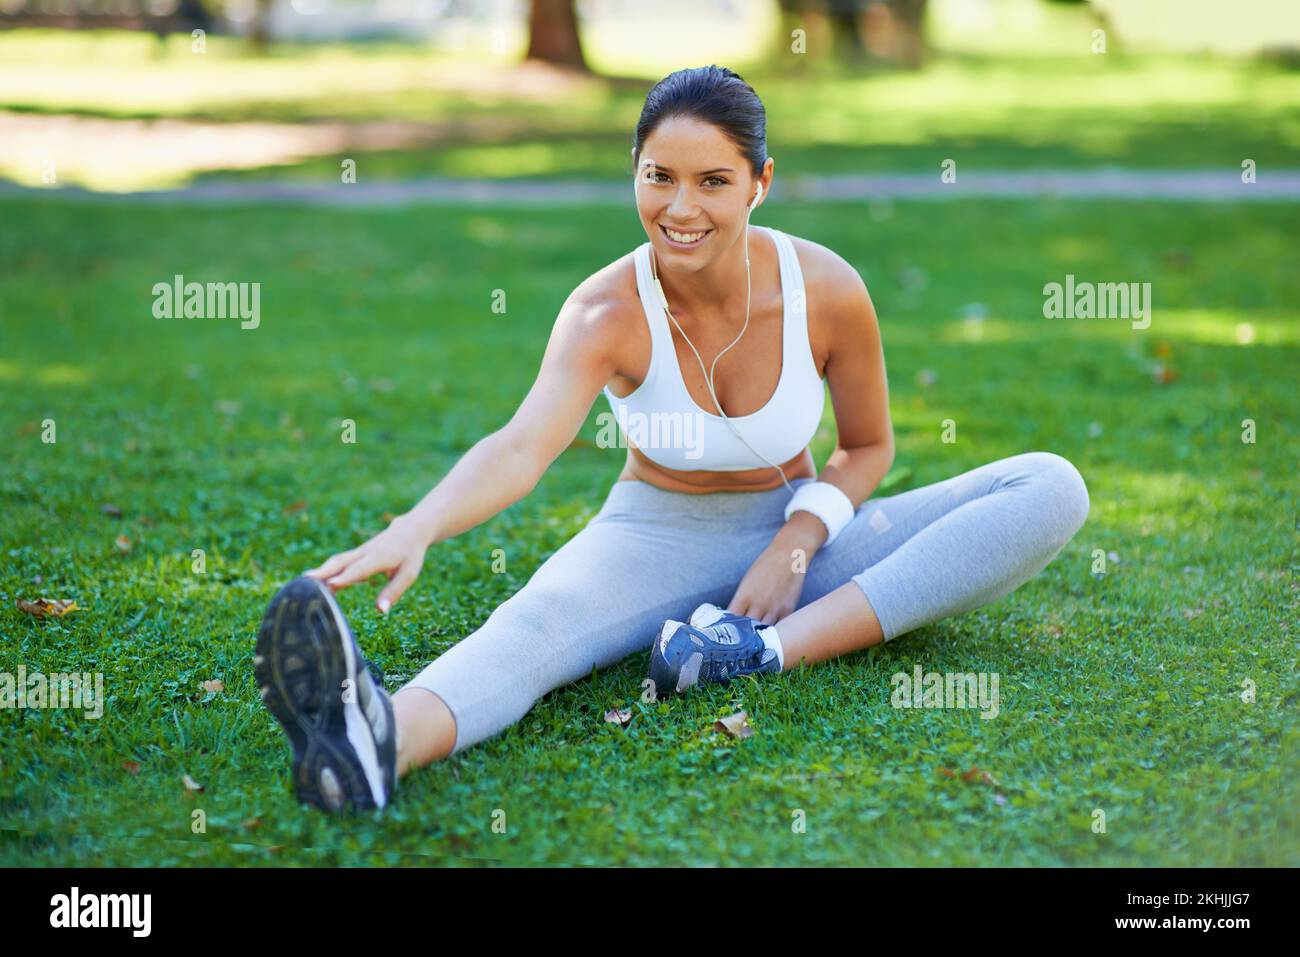 Getting limbered up for her run. a beautiful young woman stretching in the park. Stock Photo